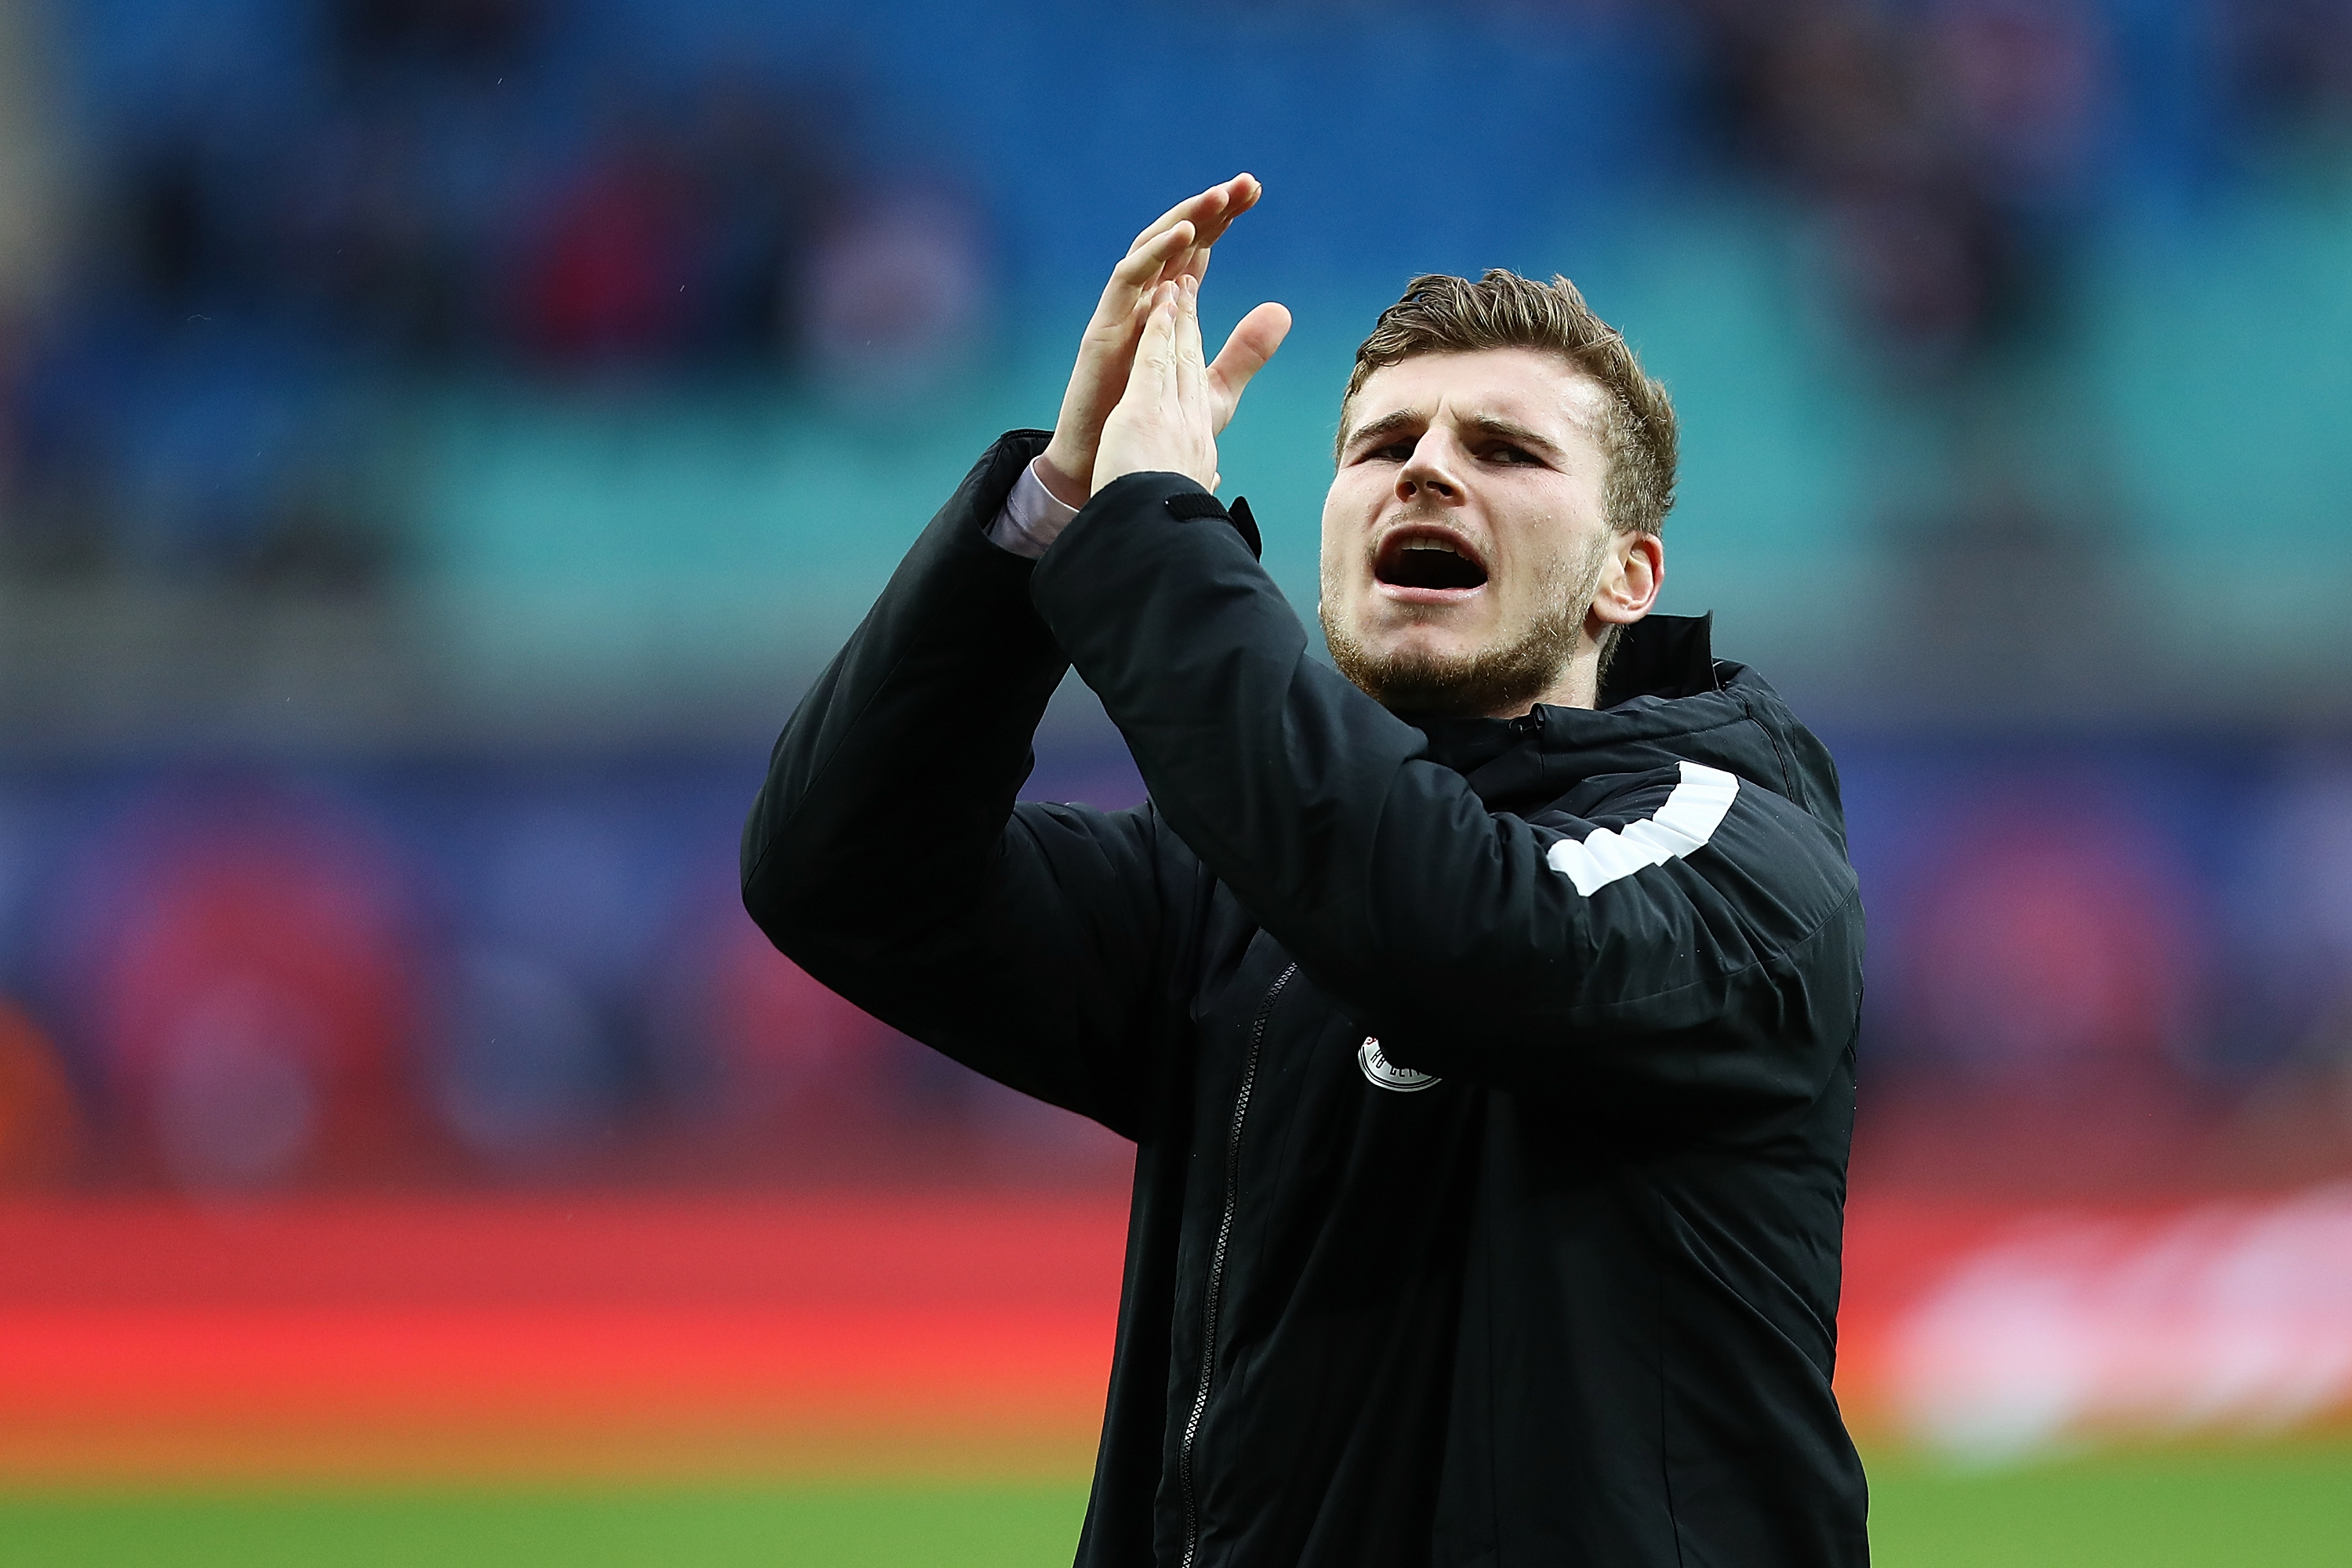 LEIPZIG, GERMANY - APRIL 15:  Timo Werner of Leipzig applauds the fans after the Bundesliga match between RB Leipzig and SC Freiburg at Red Bull Arena on April 15, 2017 in Leipzig, Germany.  (Photo by Oliver Hardt/Bongarts/Getty Images)